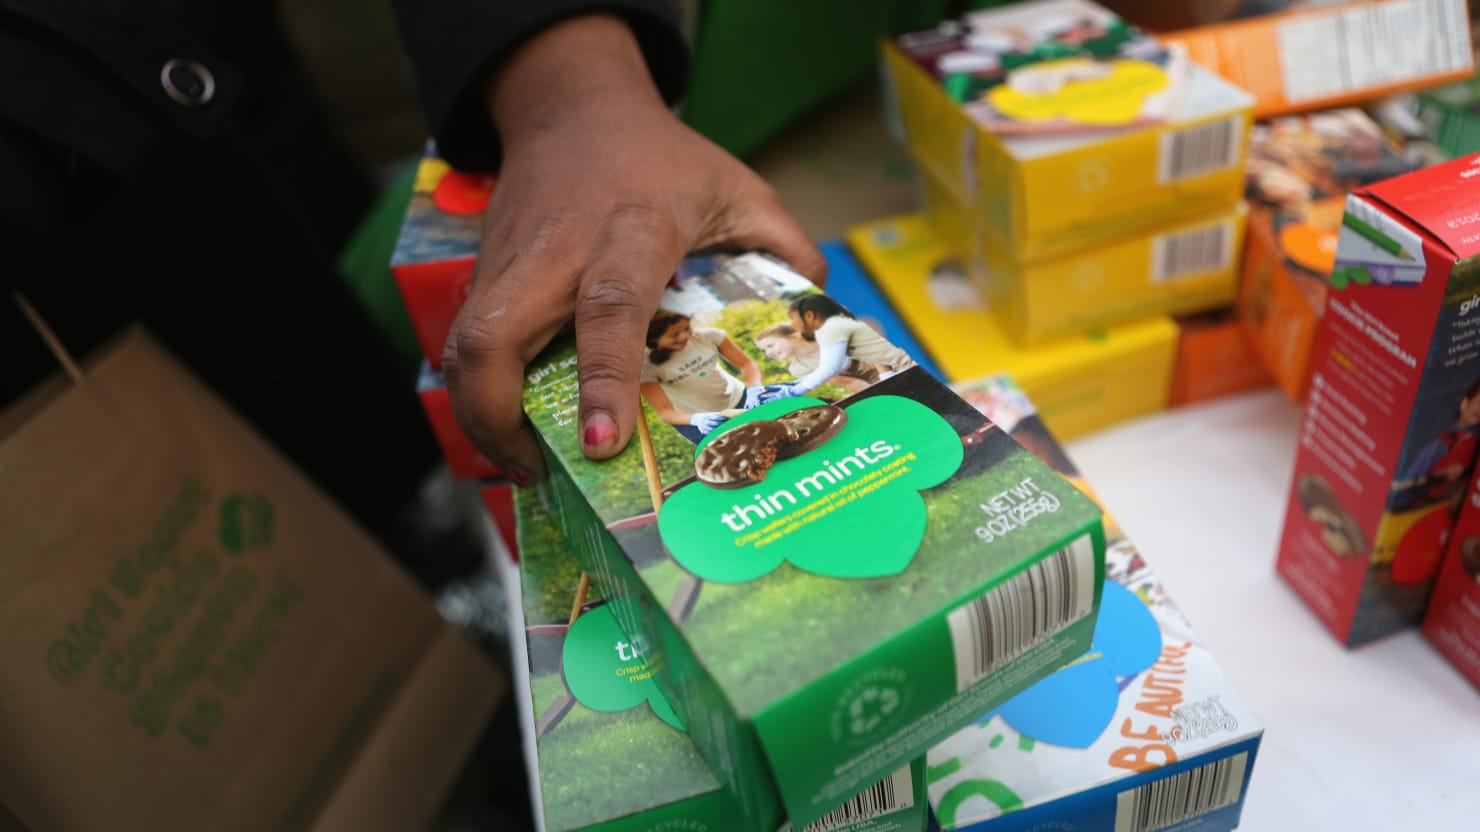 Hidden link found between child labor and girl scout cookies